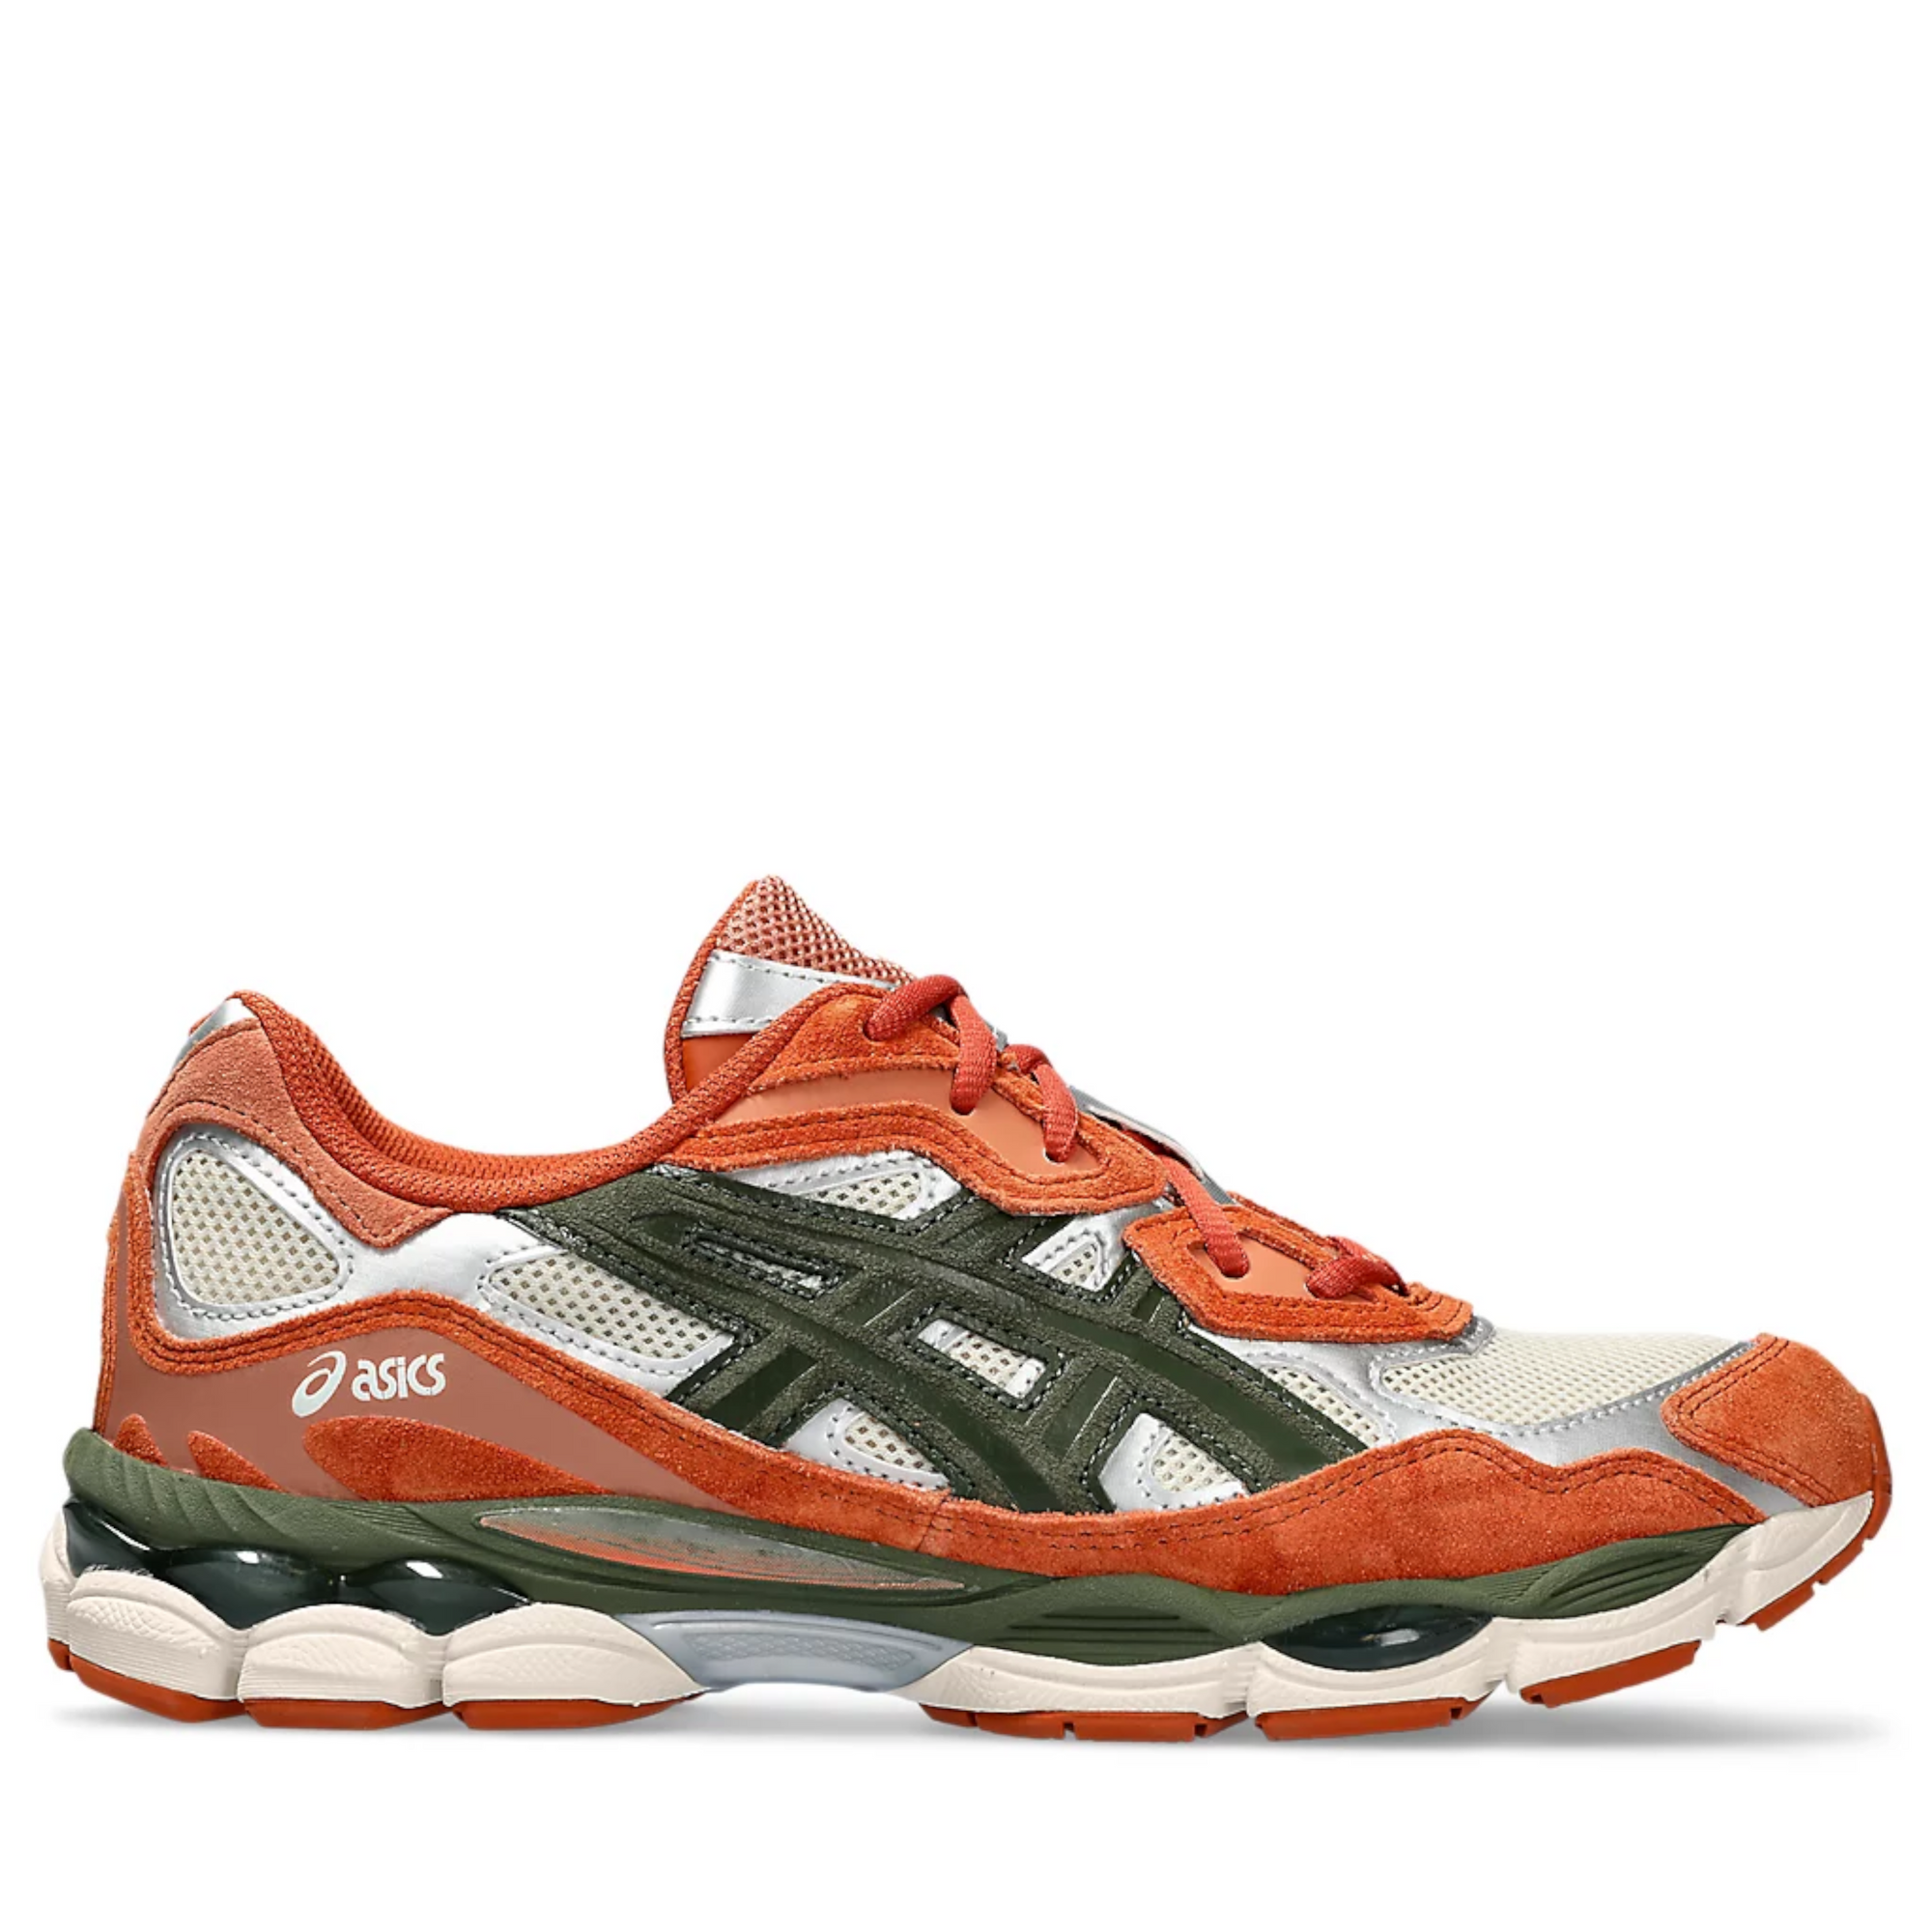 ASICS - Men's Gel-NYC - (Oatmeal/Forest 1201A789-251) view 1